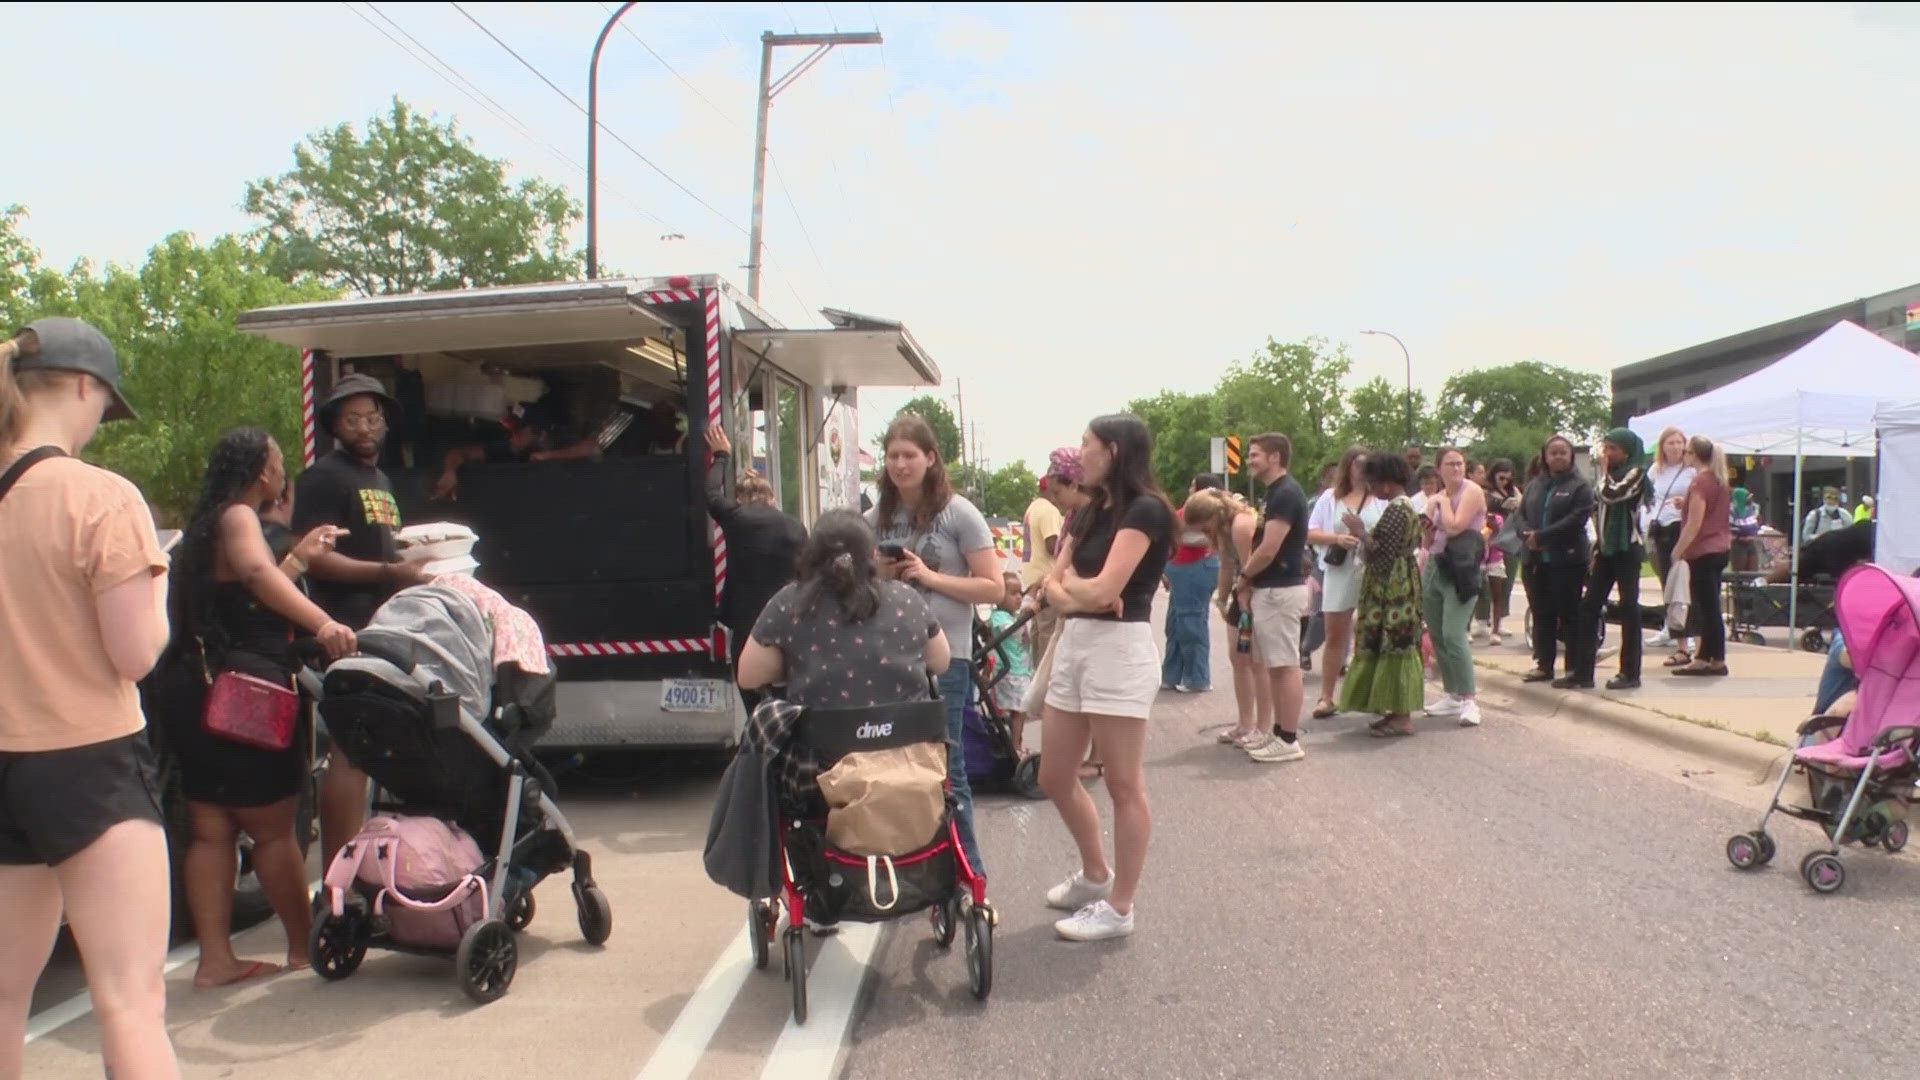 Hundreds gathered in south Minneapolis to celebrate Juneteenth with food and music.